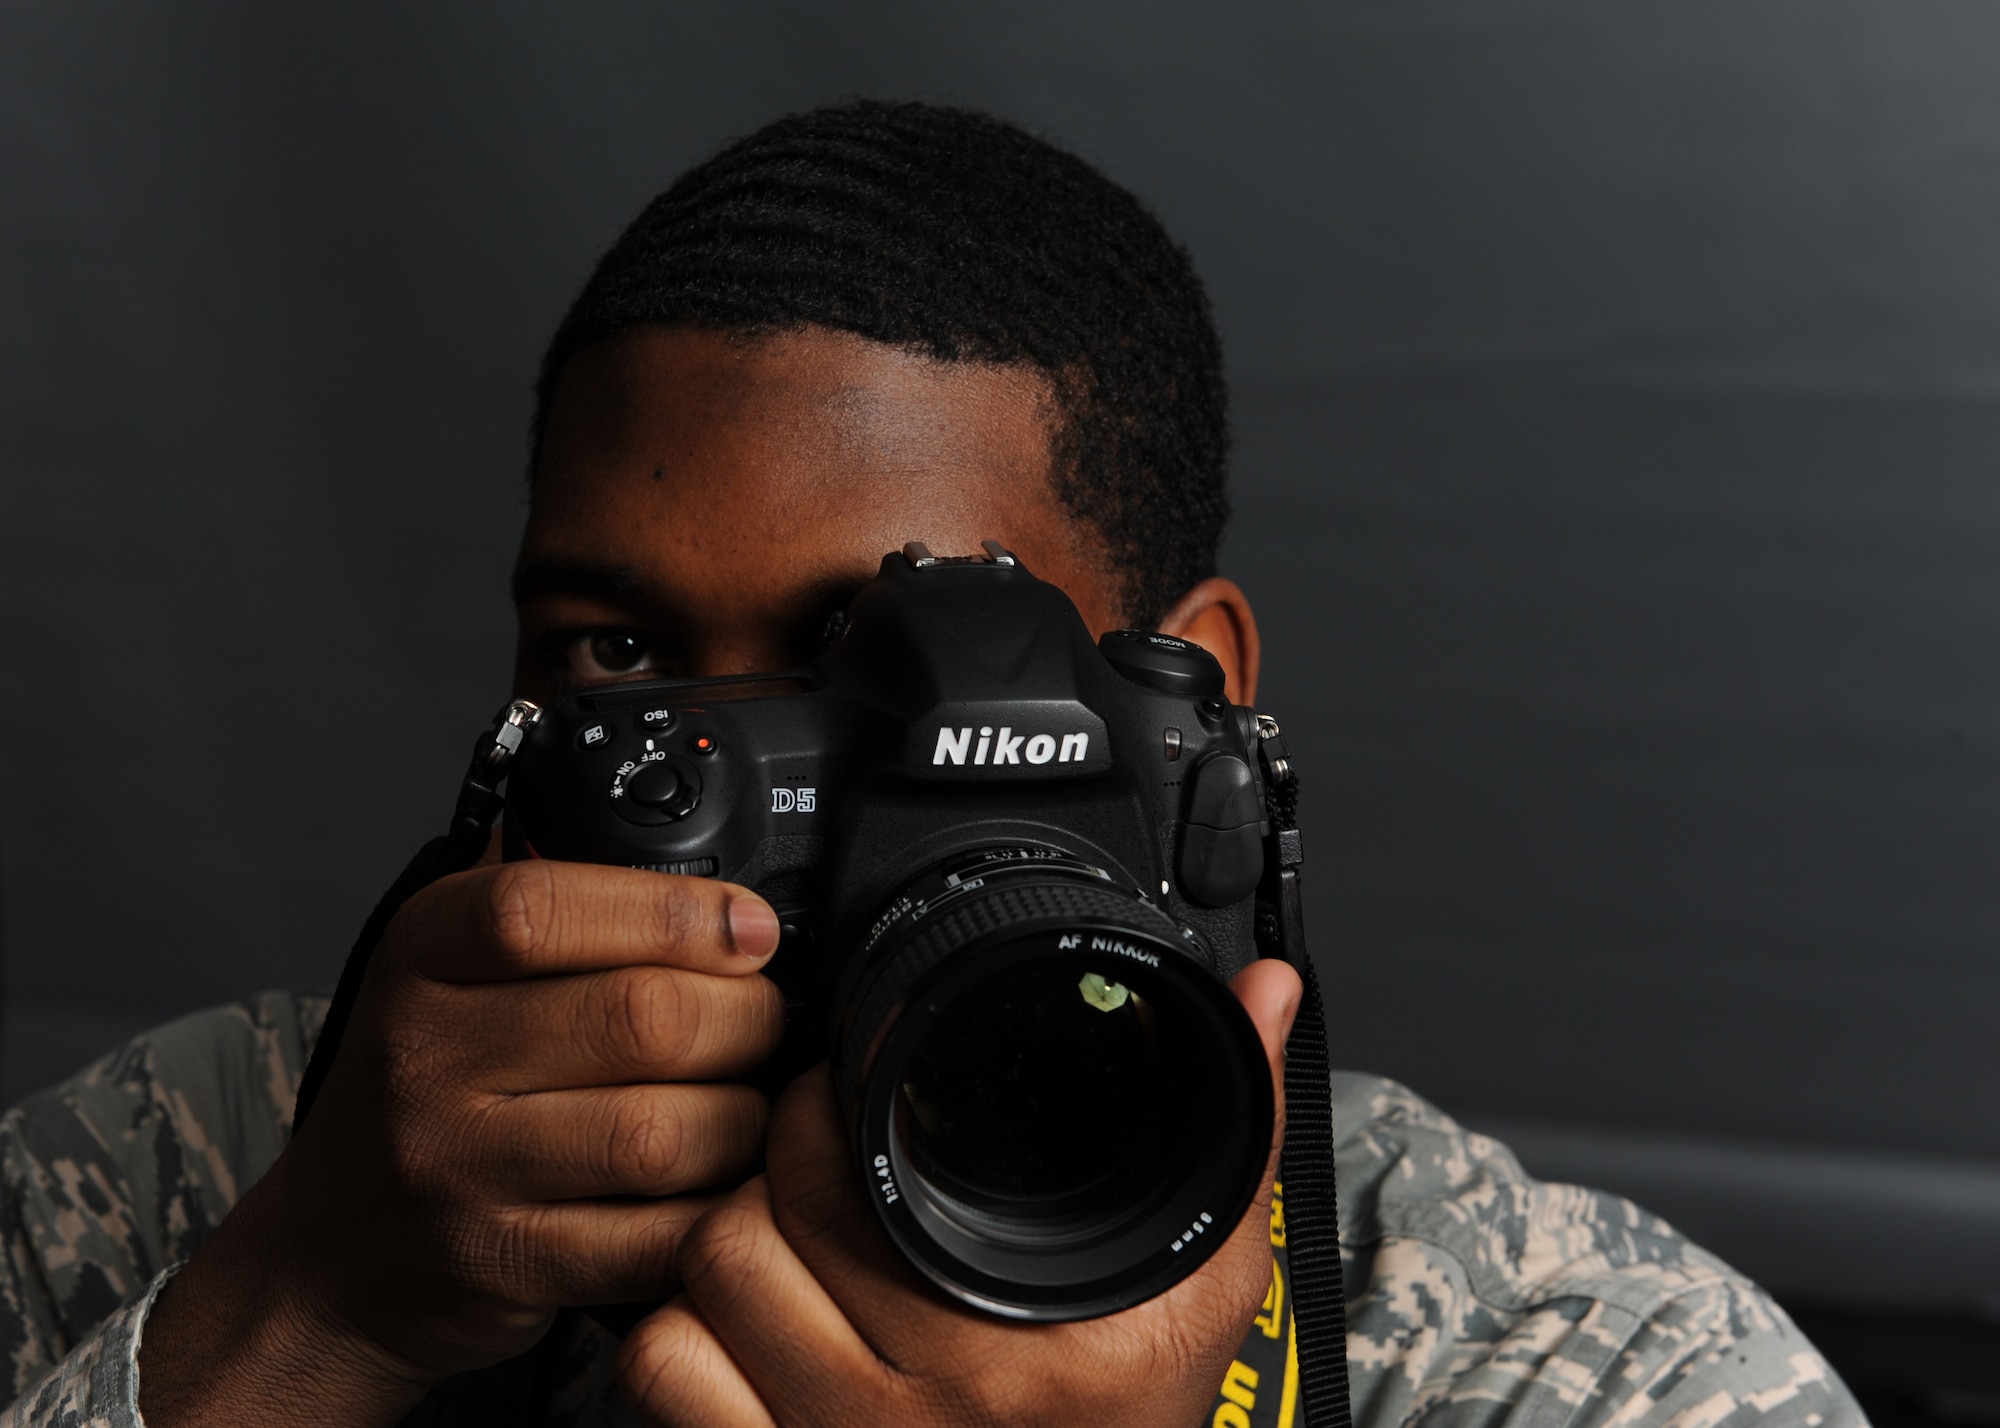 Airman 1st Class Octavius Thompson poses for a photo with a camera in his hand.